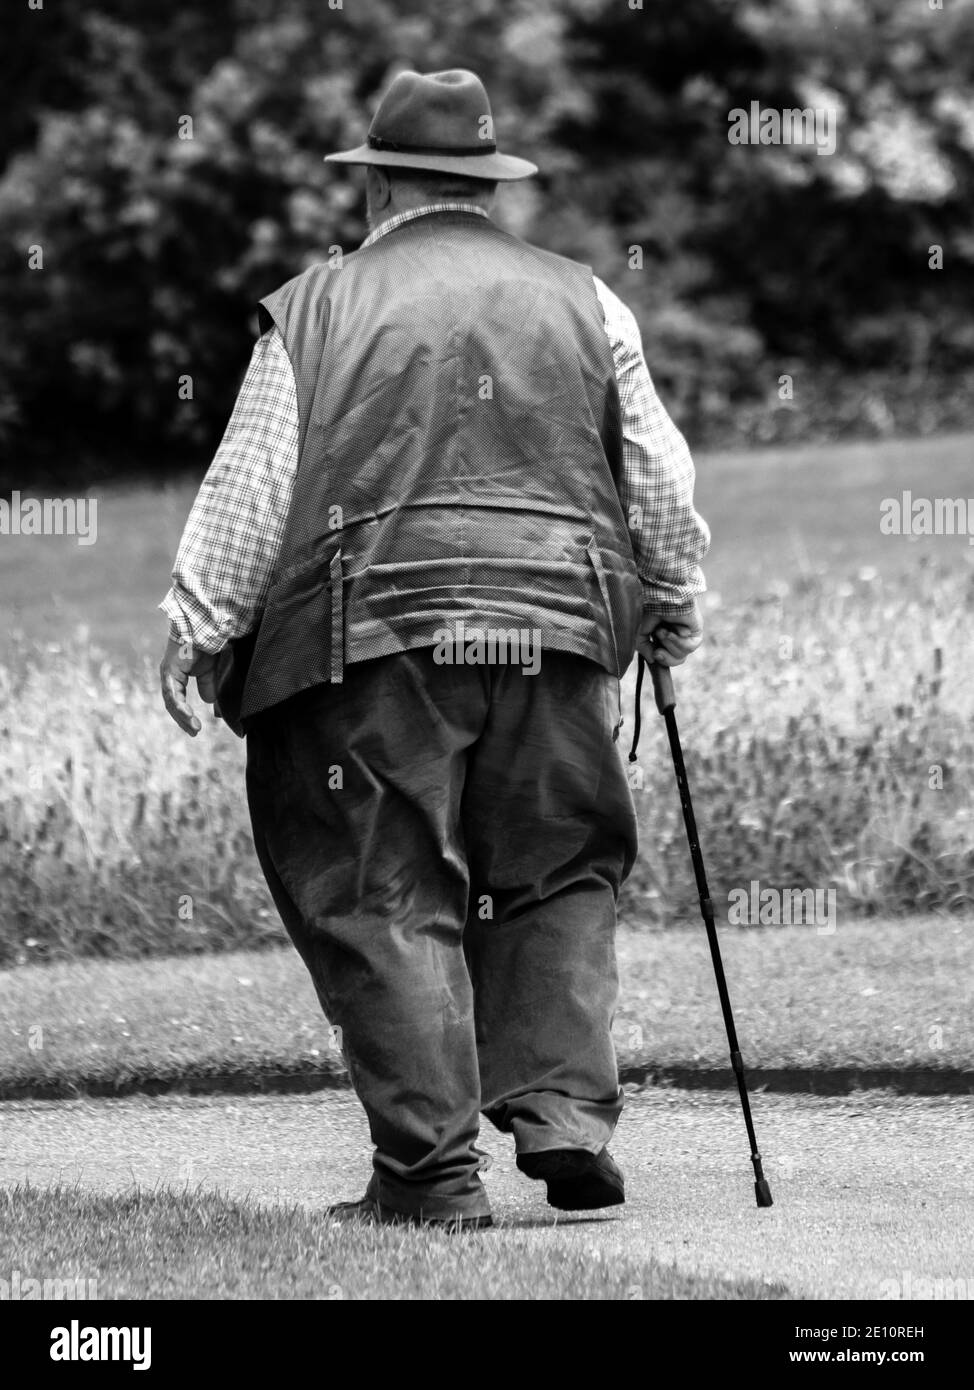 Baggy Trousers. Smartly dressed rural senior adult, overwieight with baggy trousers and waistcaot  and stick in mid step Stock Photo